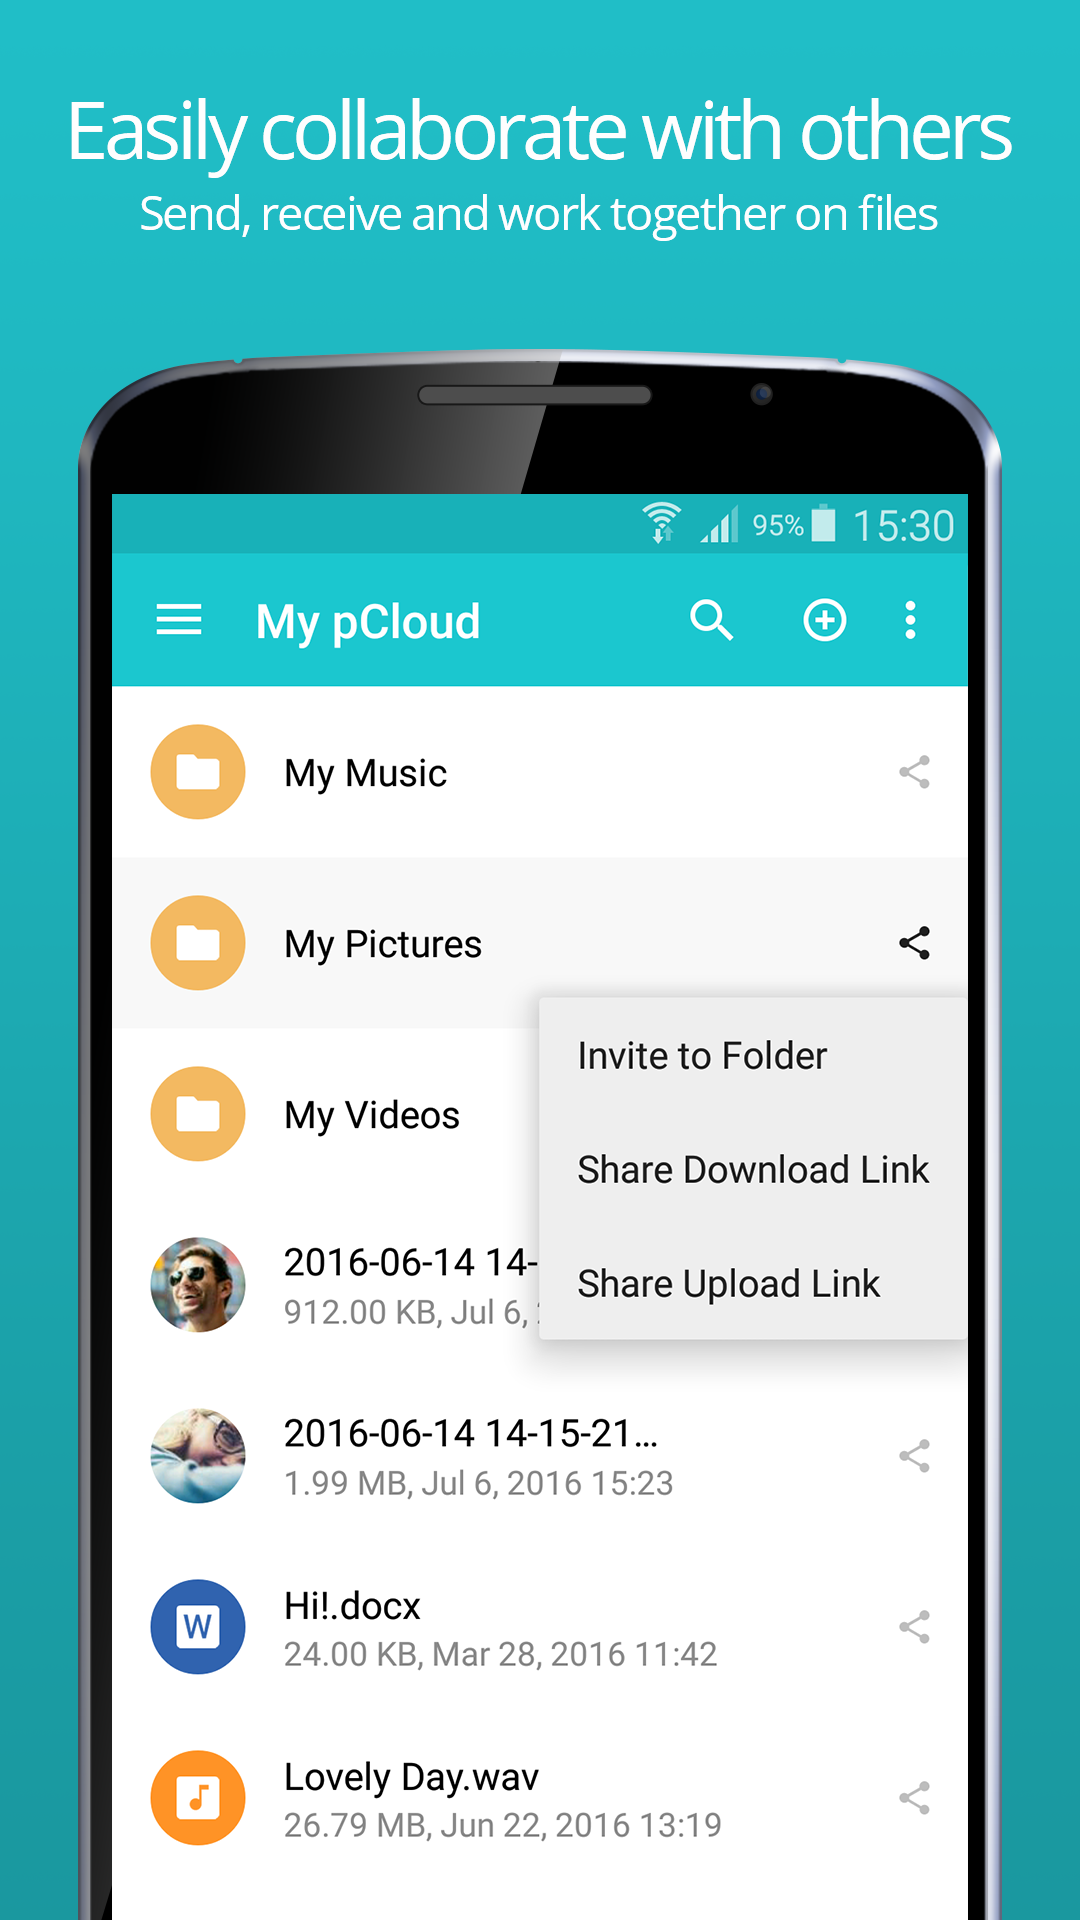 pCloud Business Software - Upload links, download links, and folder invites allow users to collaborate